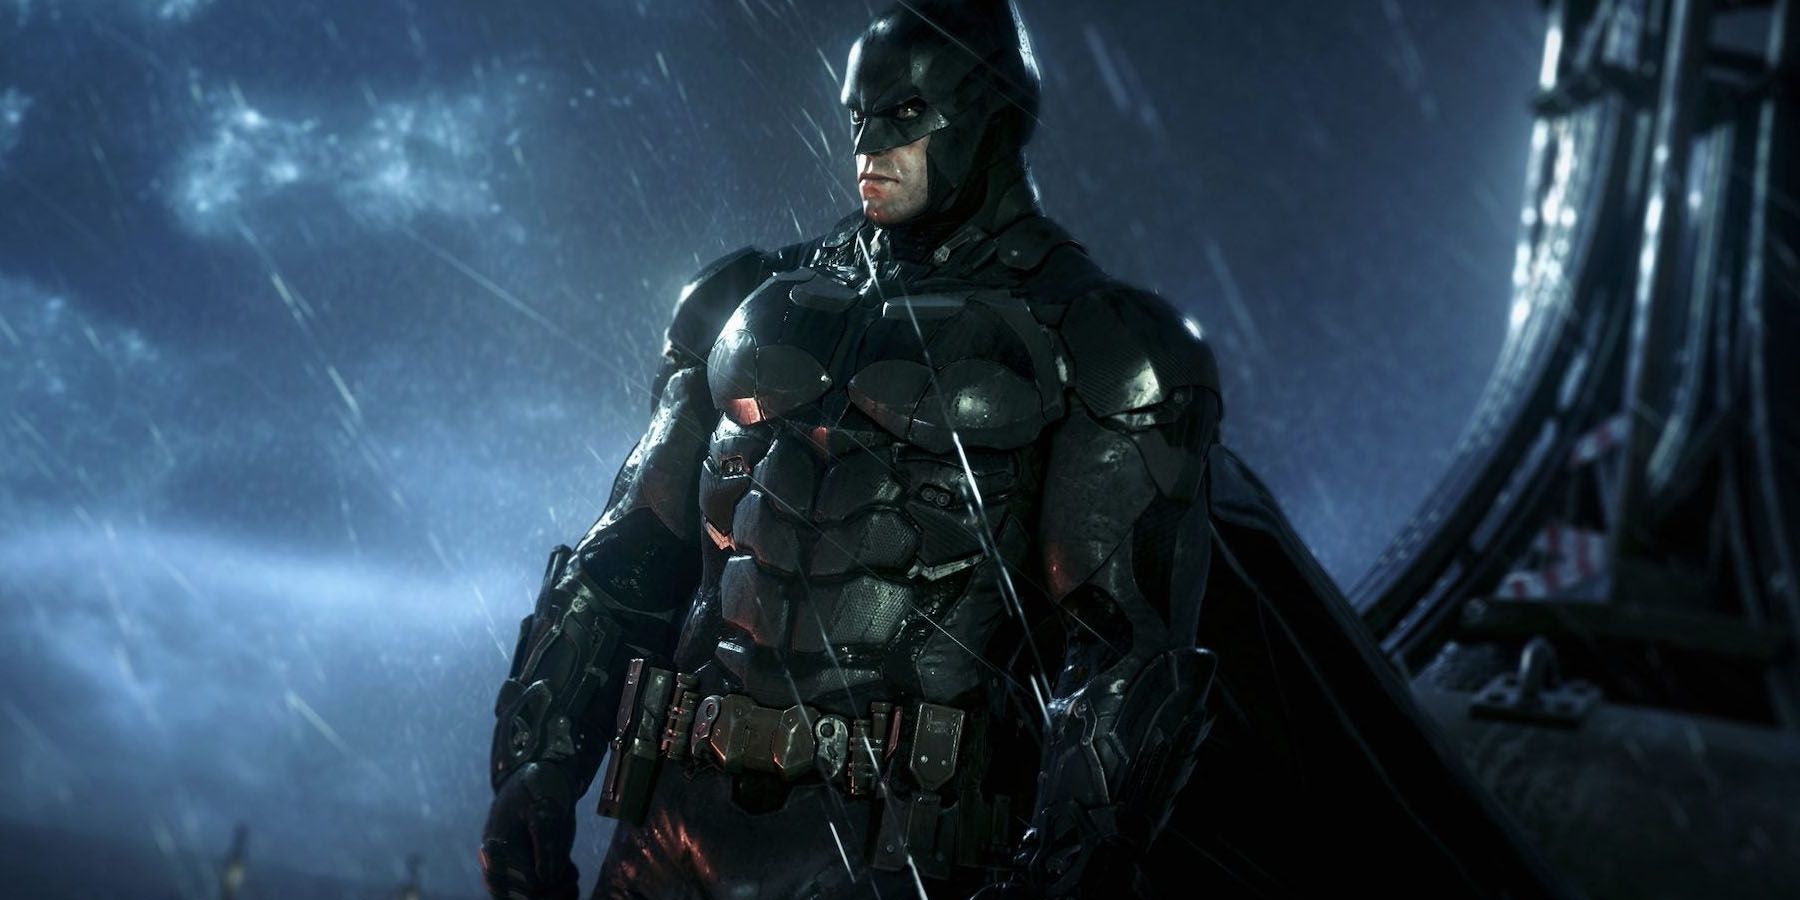 A screenshot of Batman overlooking Gotham from a rainy rooftop with his bat ears cropped out in Batman: Arkham Knight.